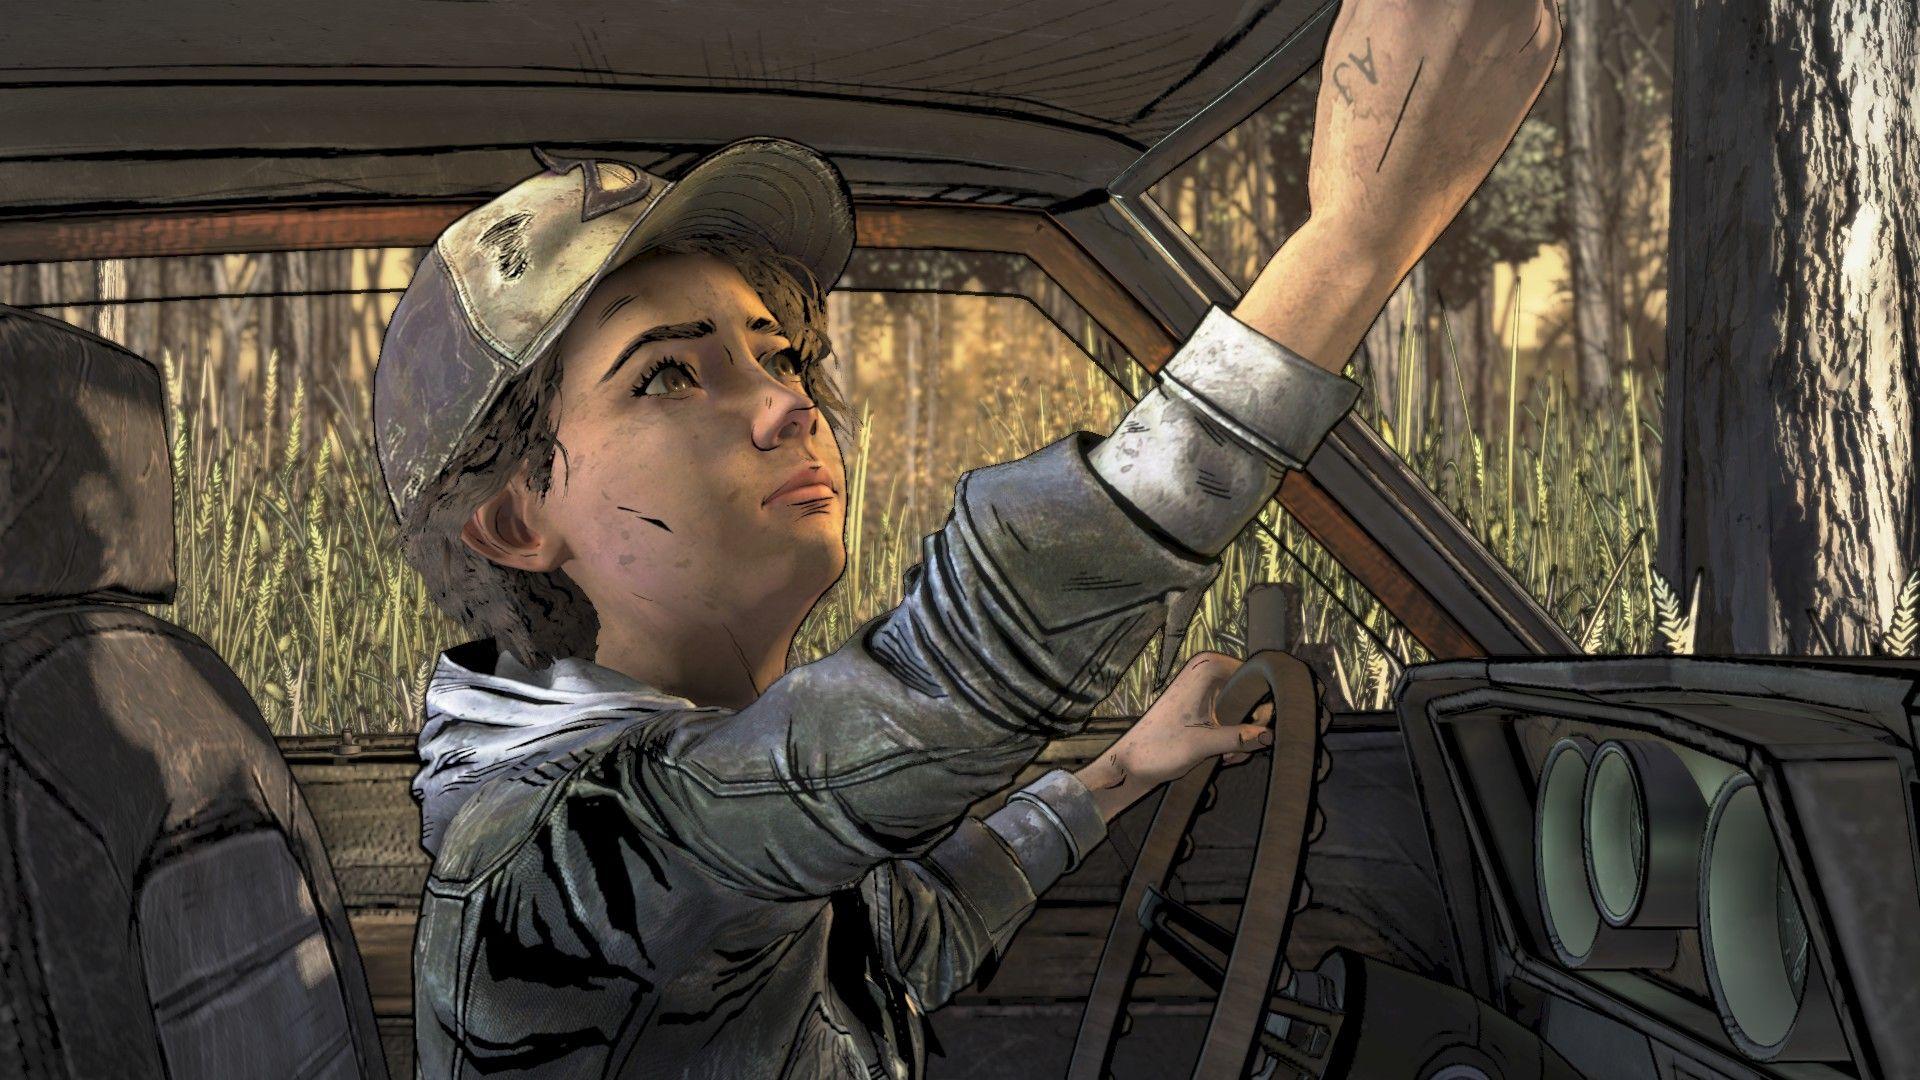 Telltale's Executive Producer on The Walking Dead, Clementine